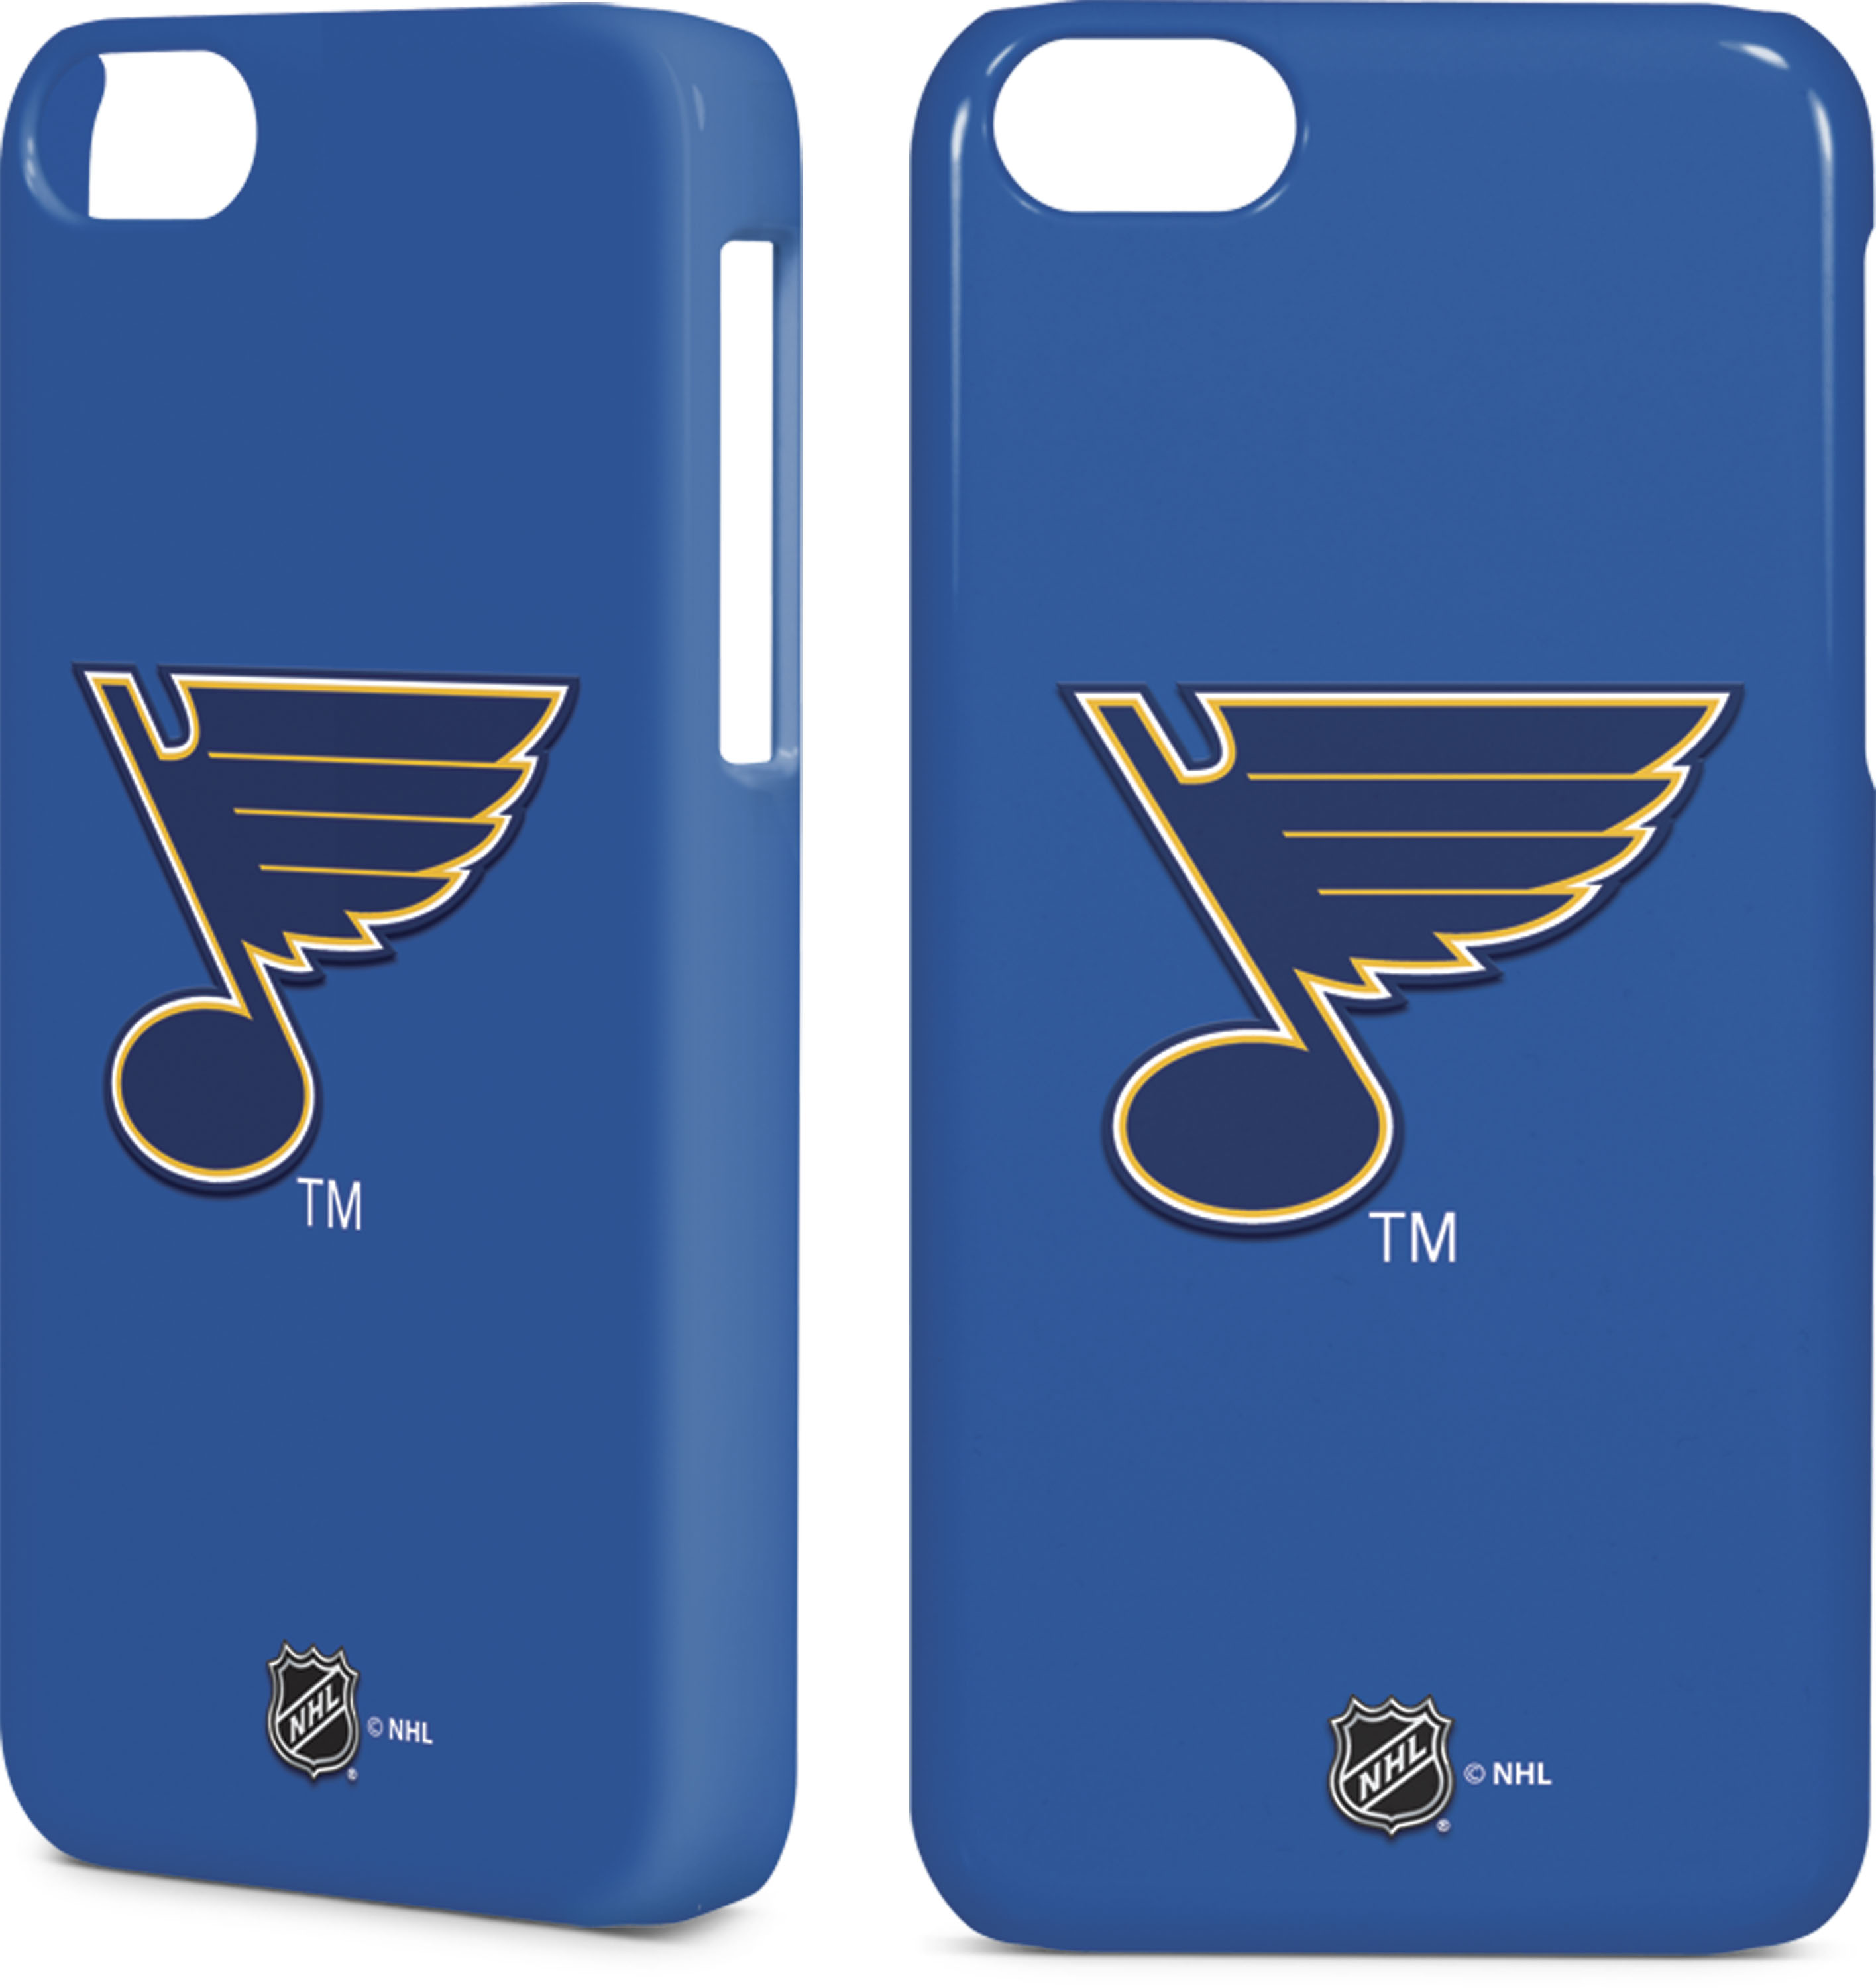 St Louis Blues Solid Background Inkfusion Lite Case For iPhone 5c